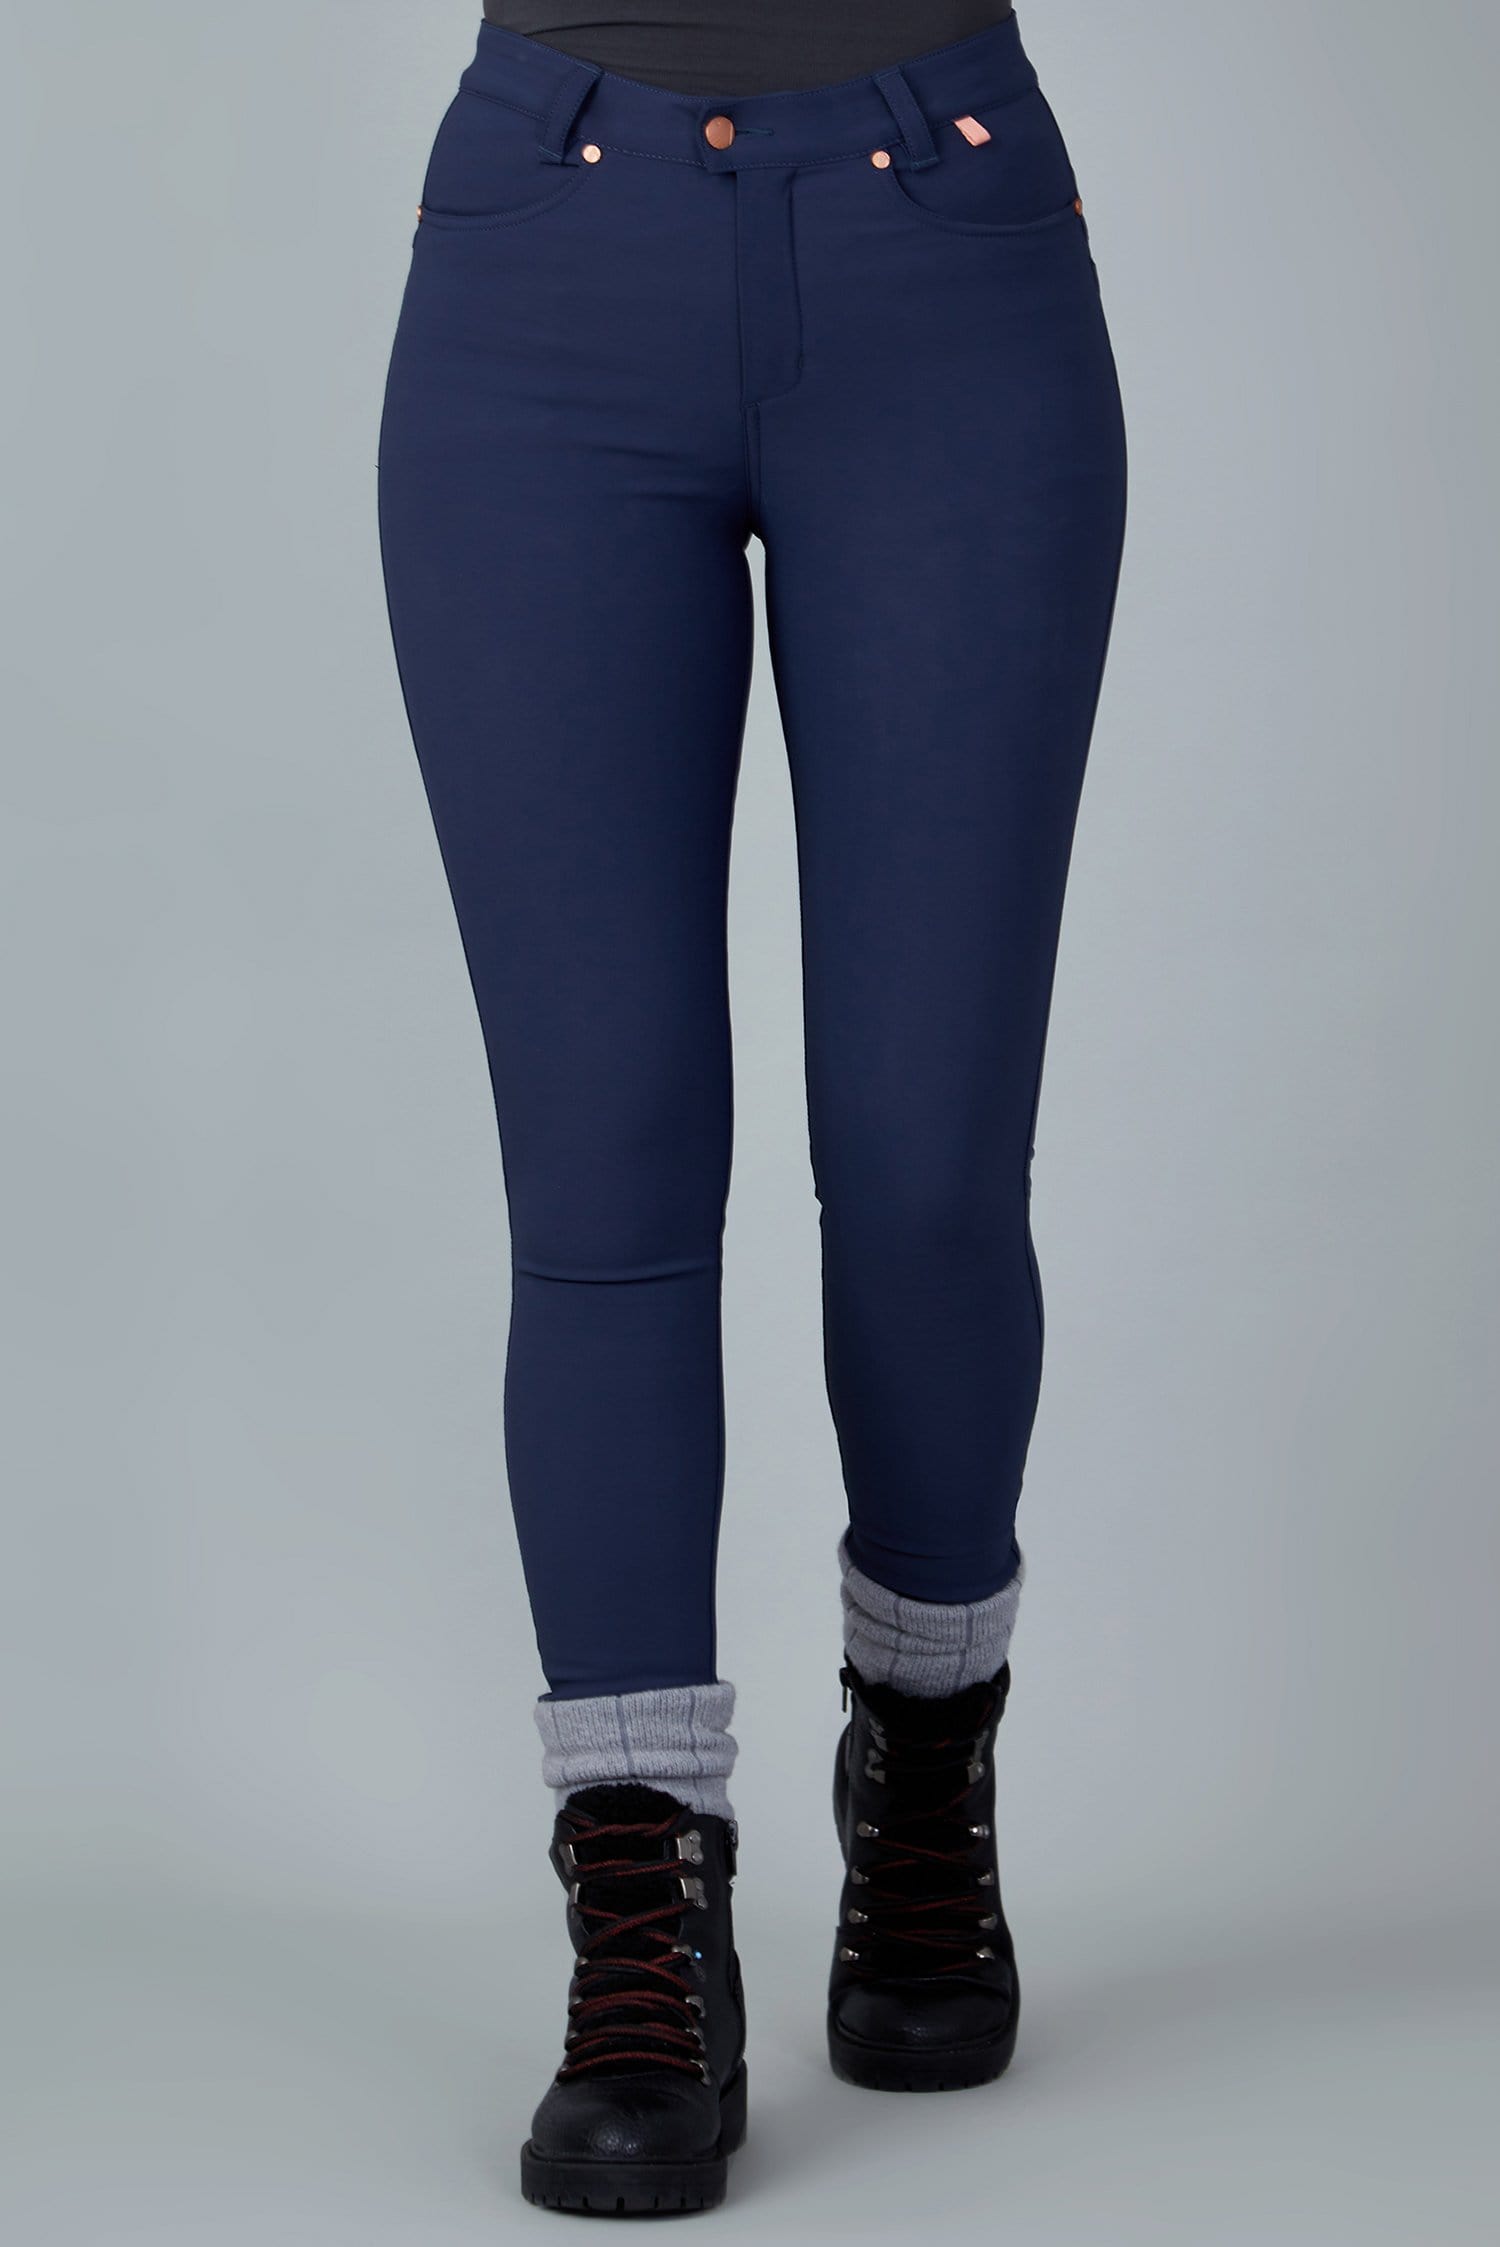 The Aventurite Stretch Skinny Outdoor Trousers - Midnight Blue - 26r / Uk8 - Womens - Acai Outdoorwear